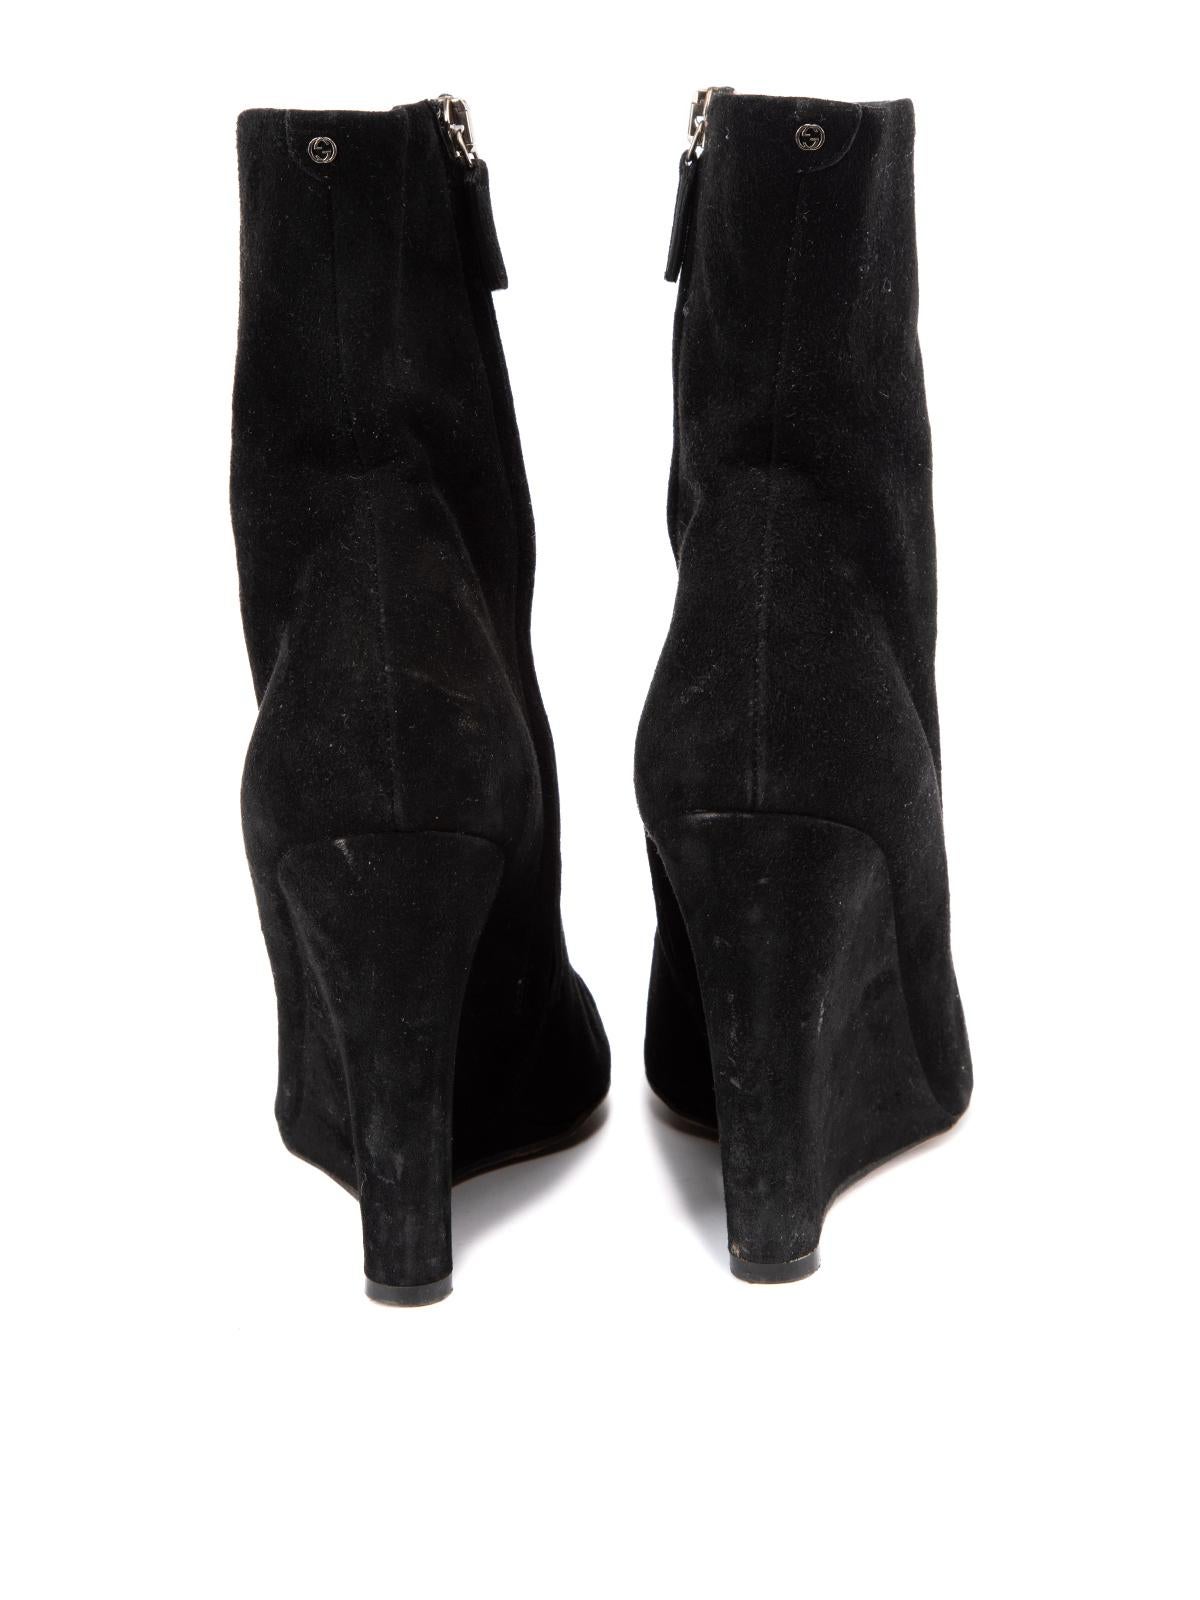 Pre-Loved Gucci Women's Black Suede Wedged Ankle Boots For Sale 1